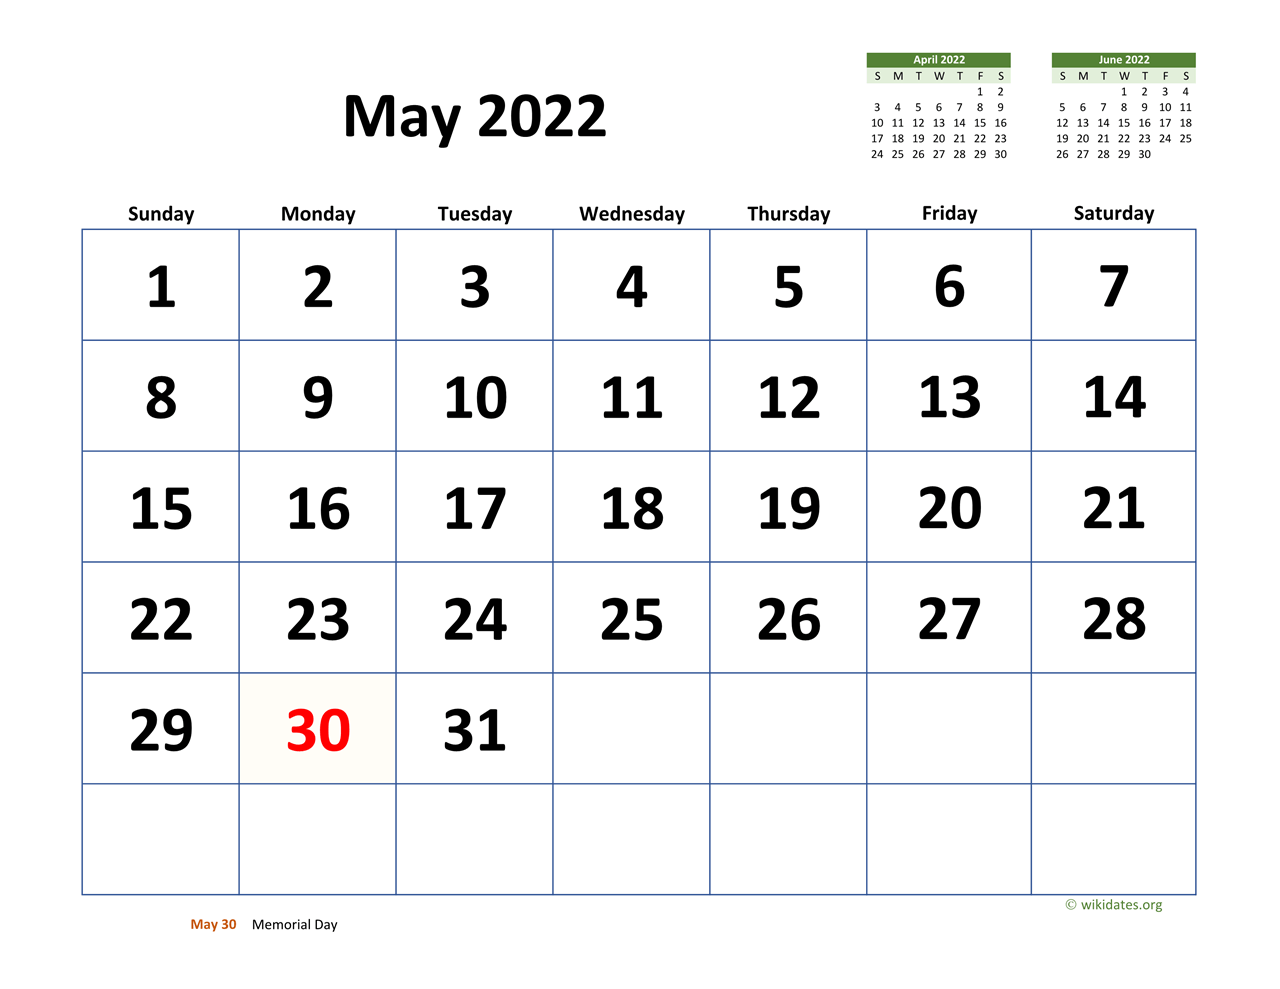 May Calendar For 2022 May 2022 Calendar With Extra-Large Dates | Wikidates.org